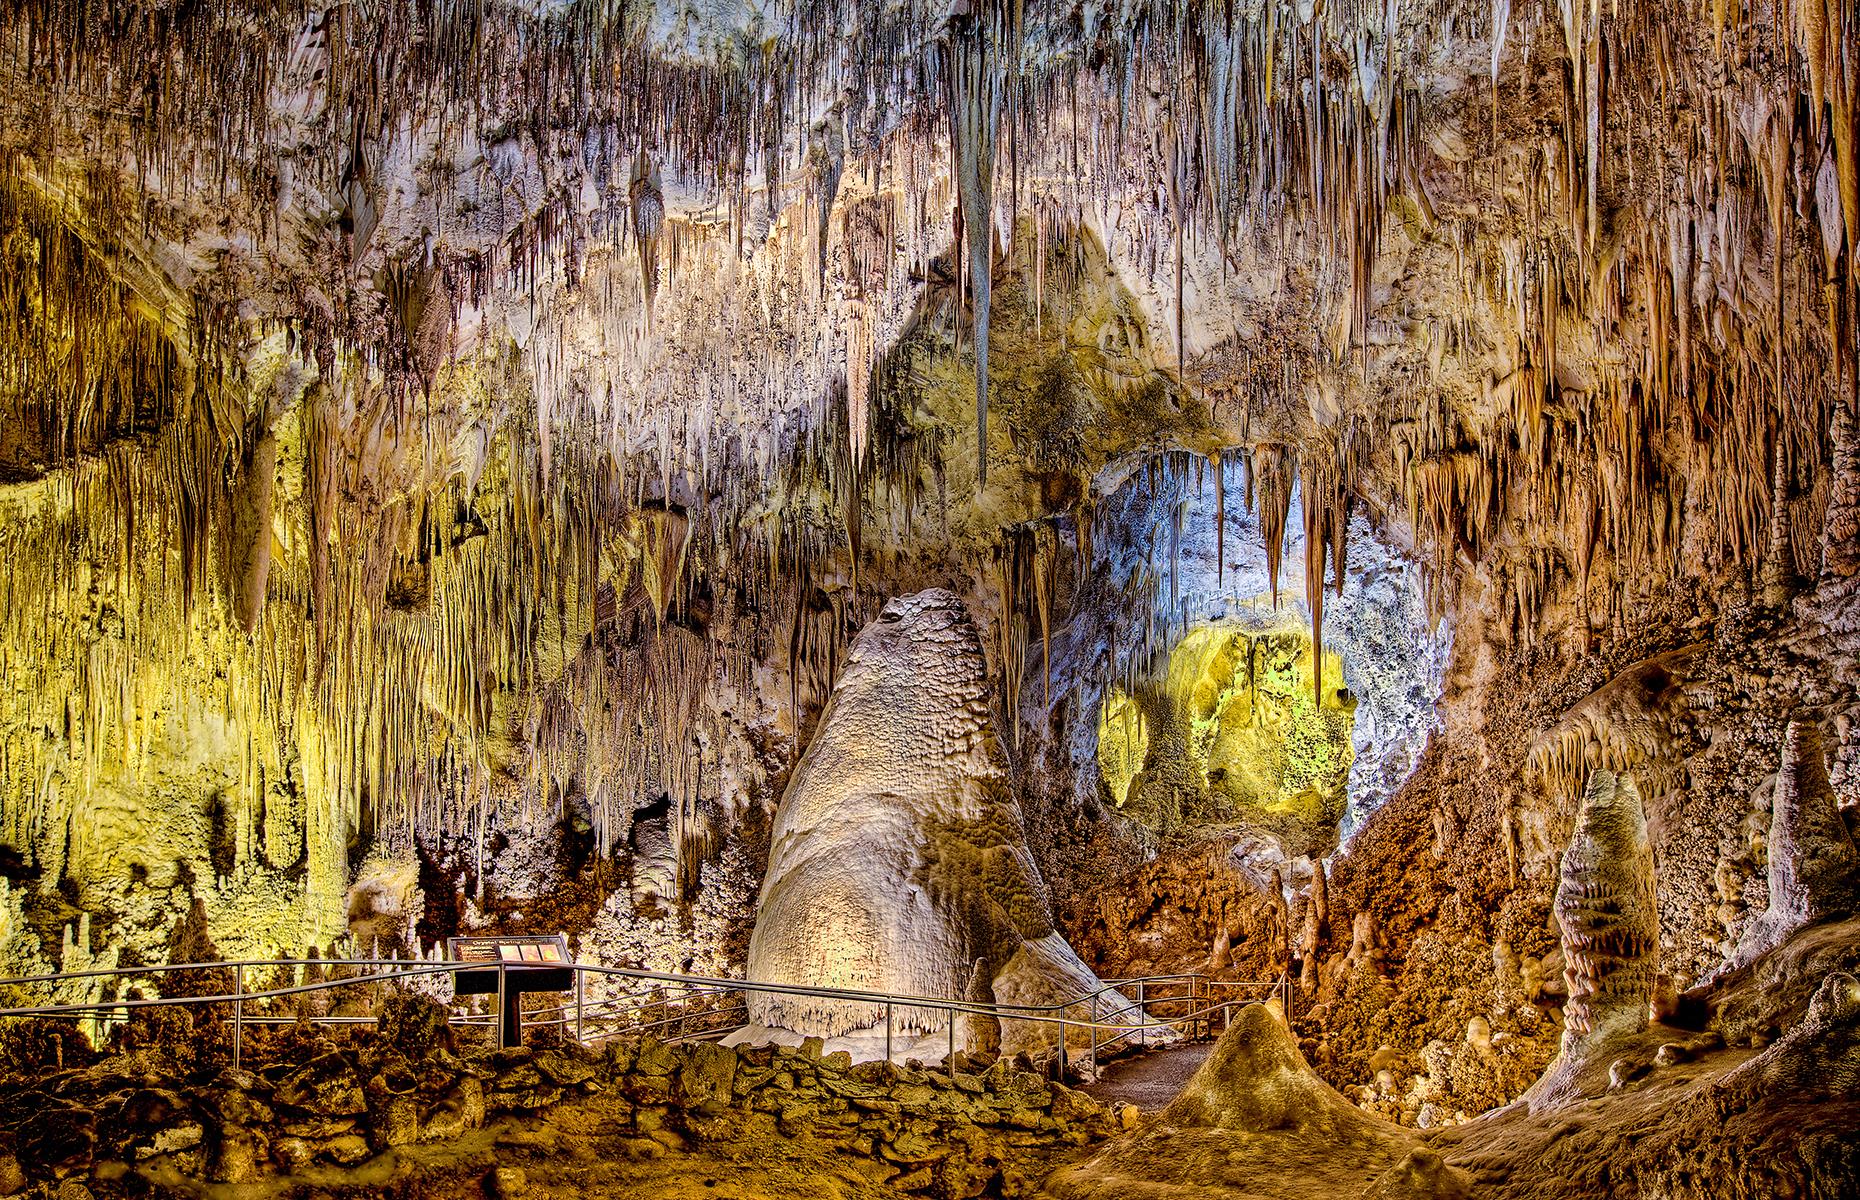 <p>If tight and dark places are not for you in real life, why not explore them virtually? <a href="https://artsandculture.withgoogle.com/en-us/national-parks-service/carlsbad-caverns/natural-entrance-tour">This tour</a> of Carlsbad Caverns in New Mexico gives a glimpse inside the caverns and the incredible formations that cover their ceilings and walls. Then, don a virtual headlamp and trek through a cave after virtually flying with thousands of bats that live here.</p>